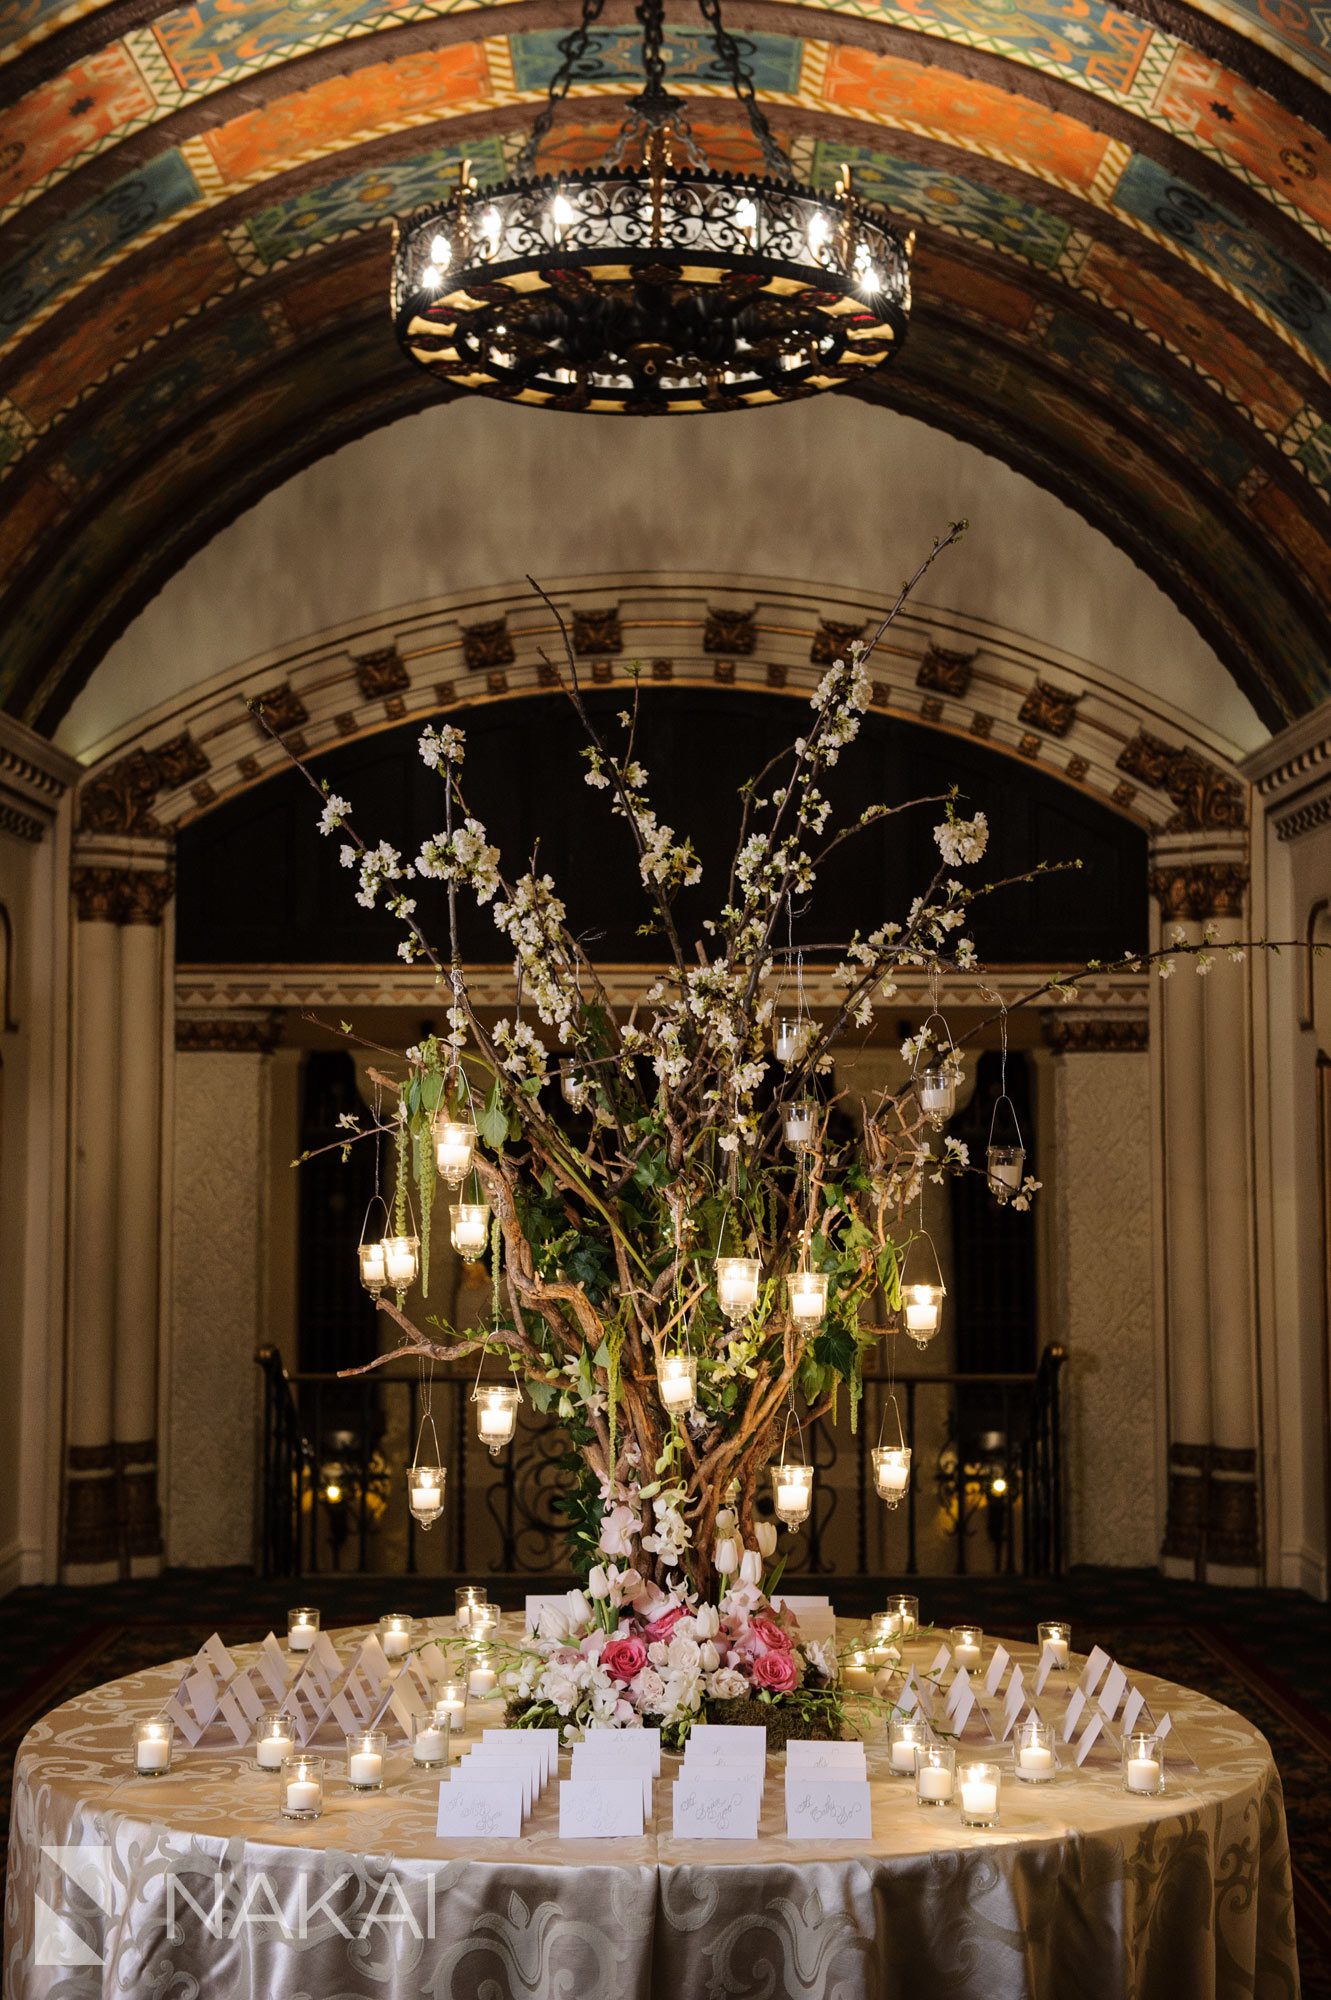 intercontinental magnificent mile wedding photo chicago hall of lions wedding escort card table